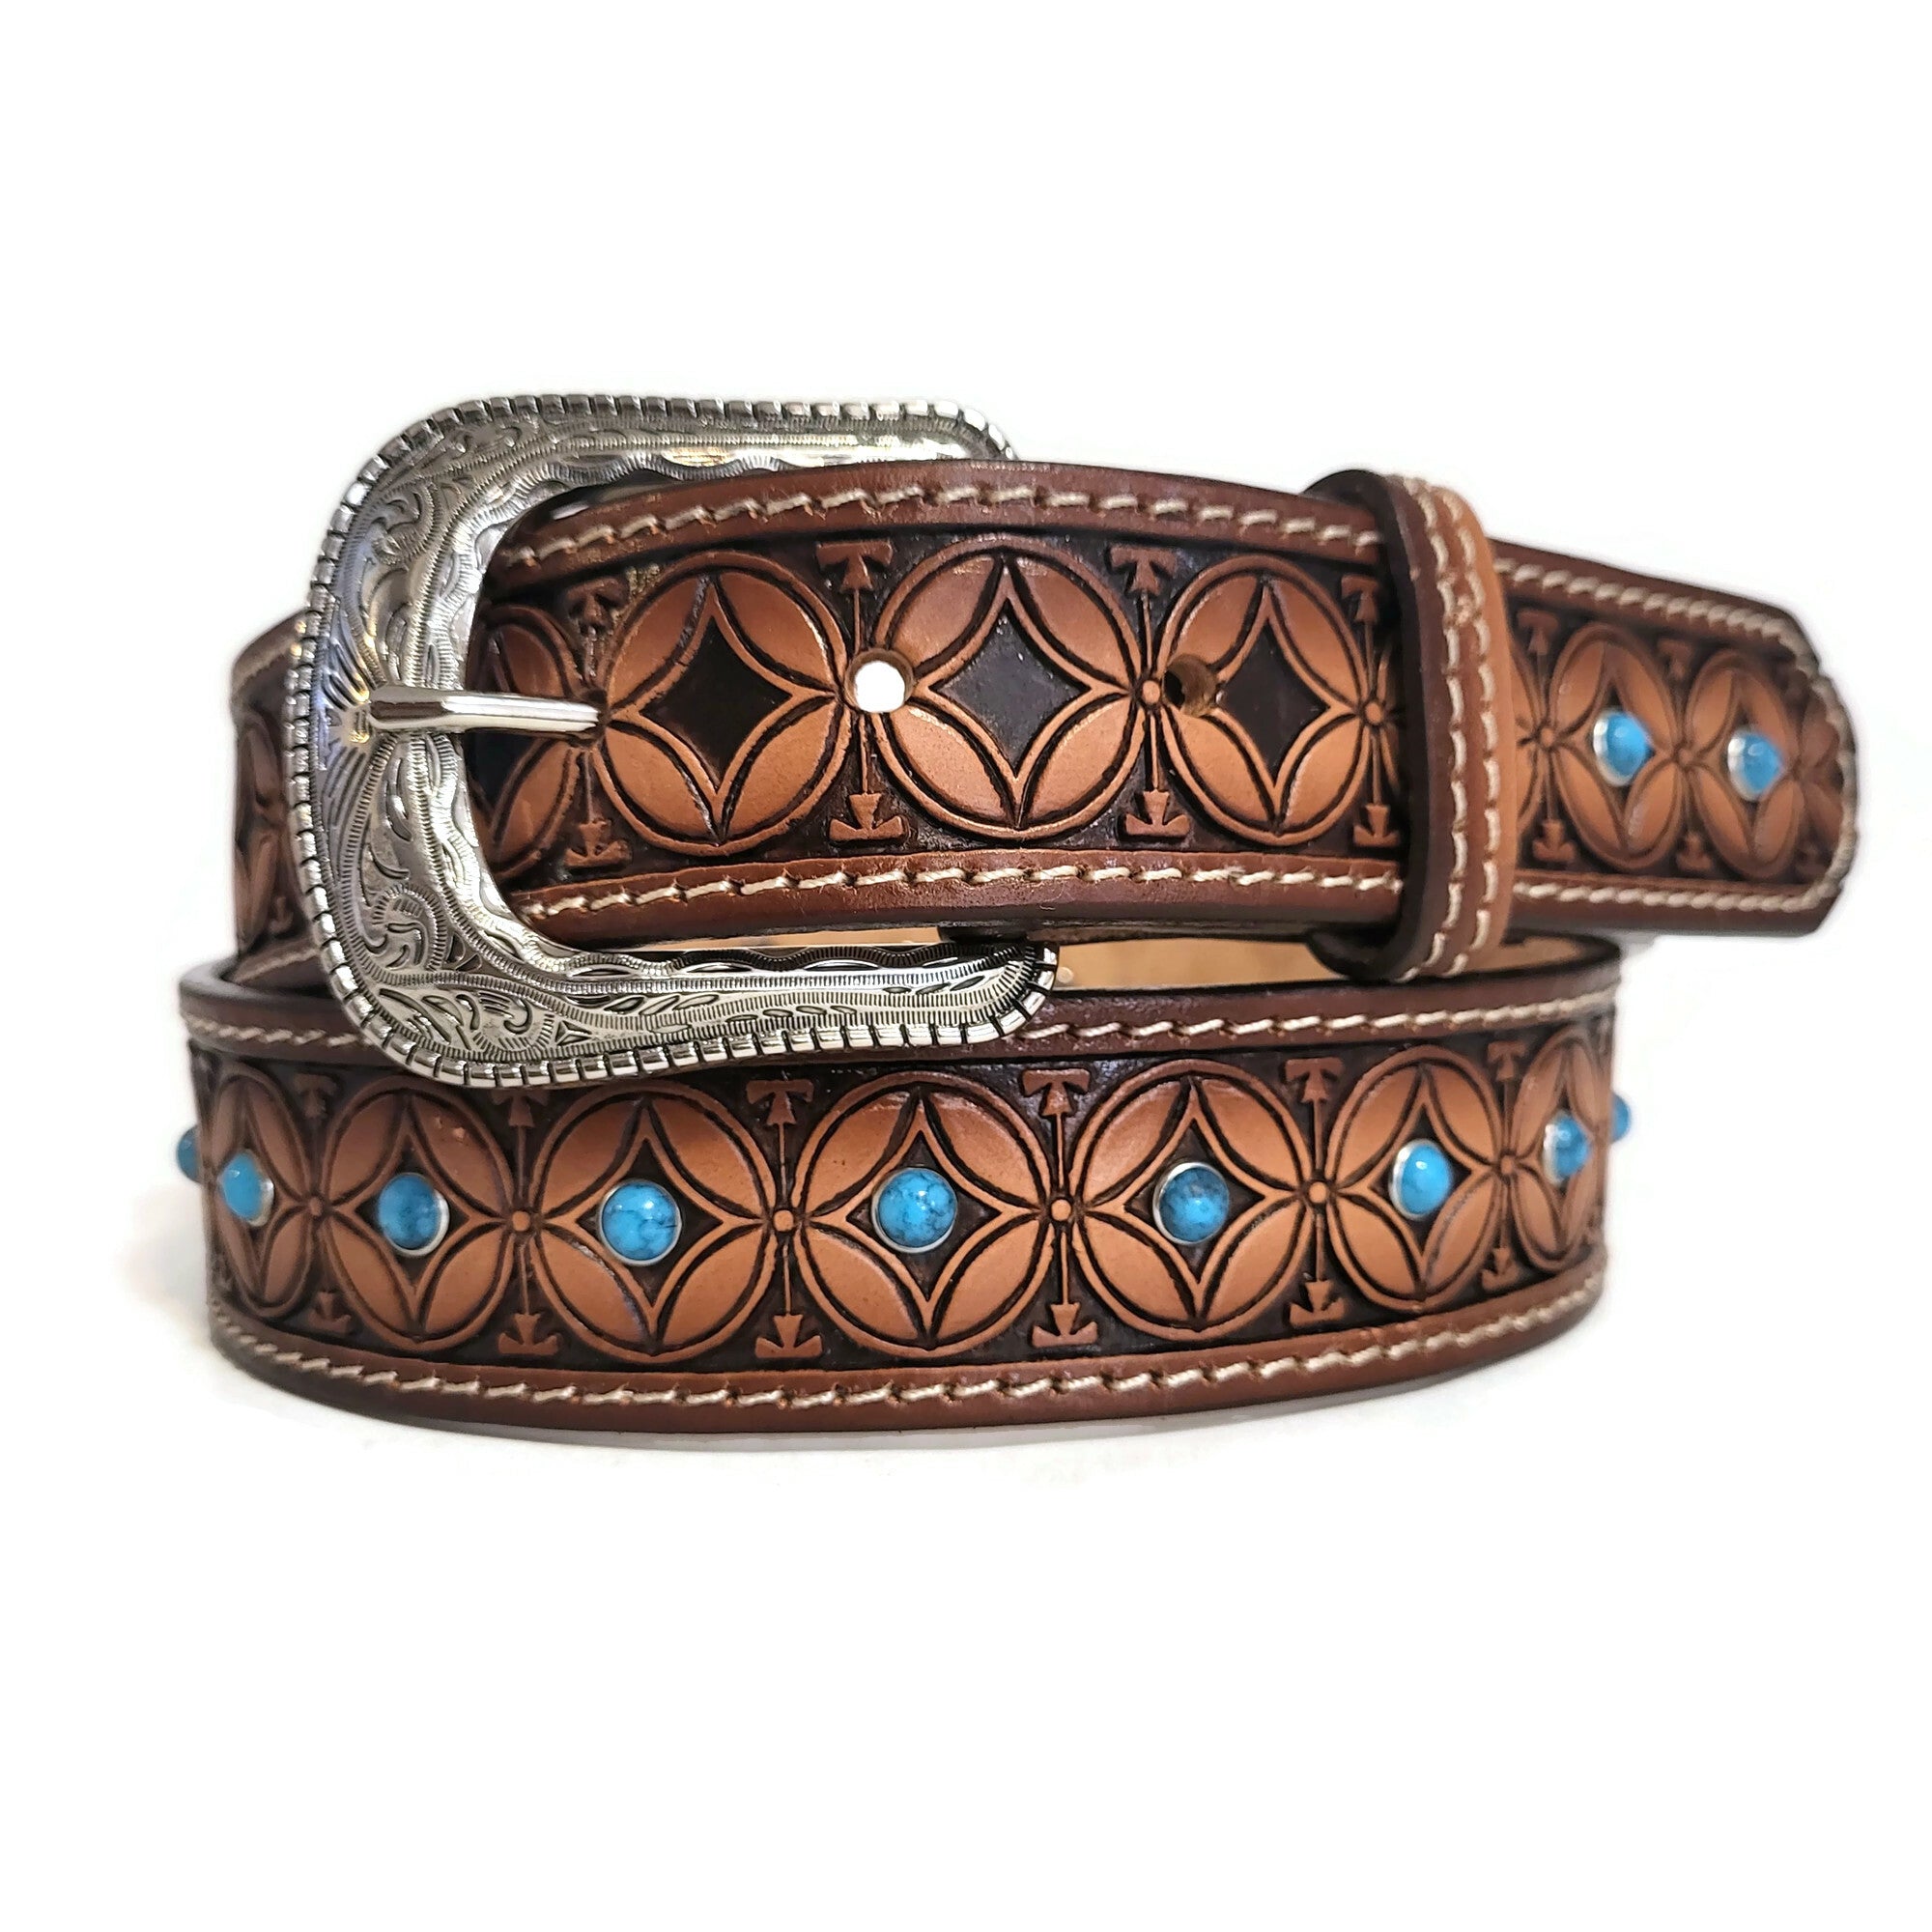 Brown leather belt for women